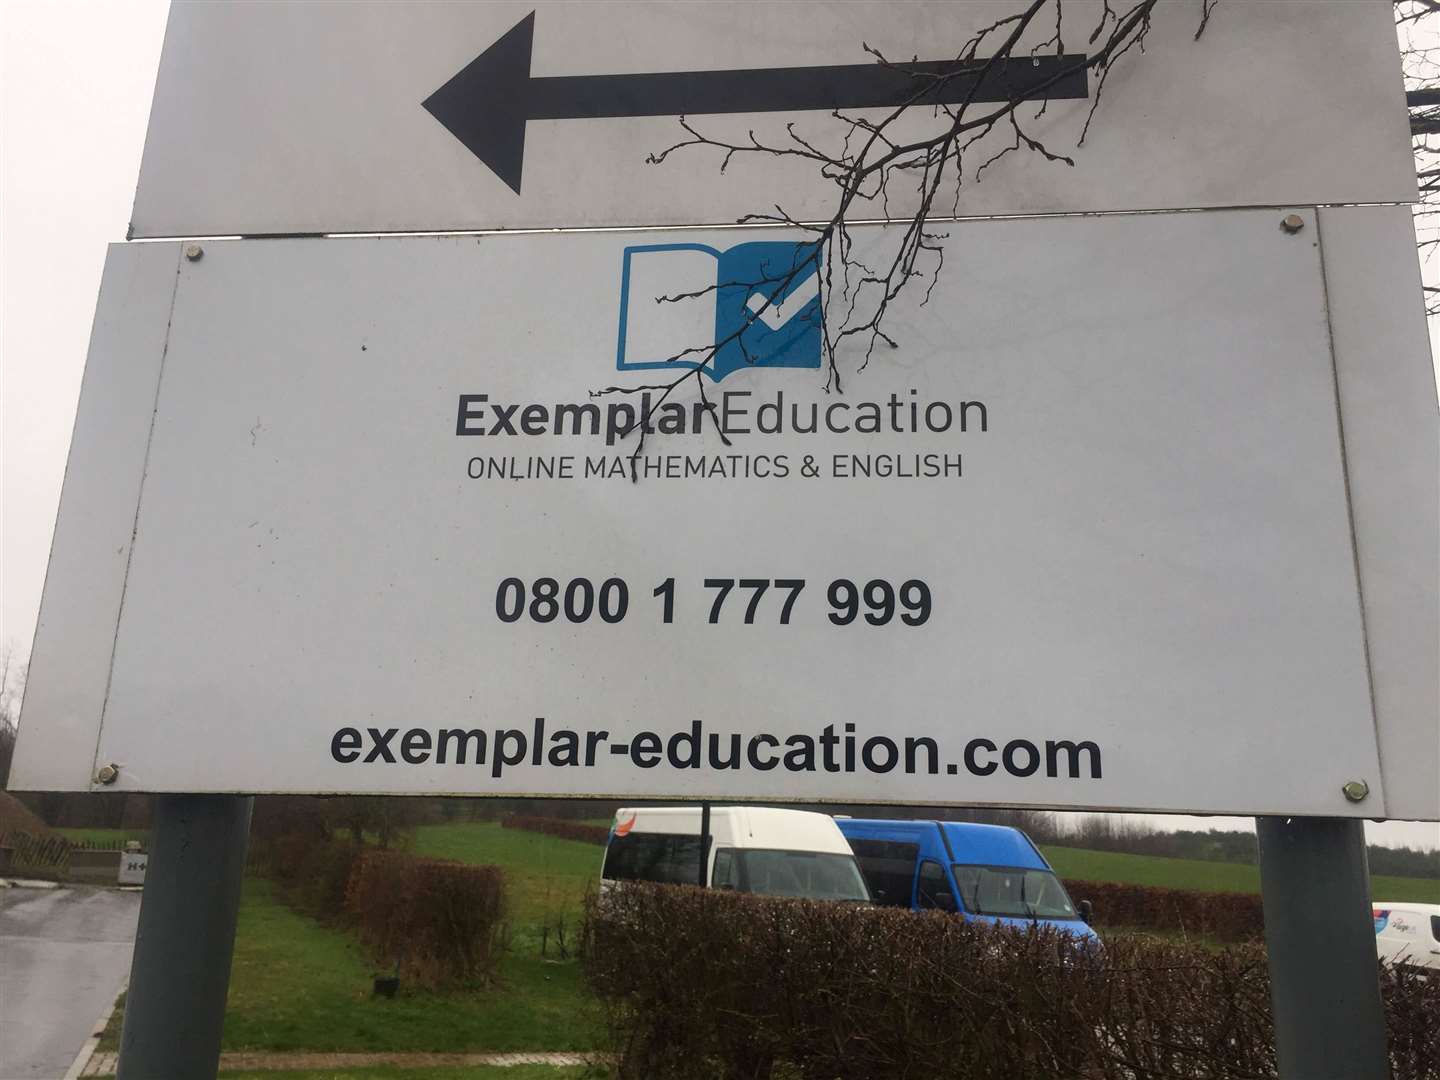 Examplar Education in Maidstone has gone into administration